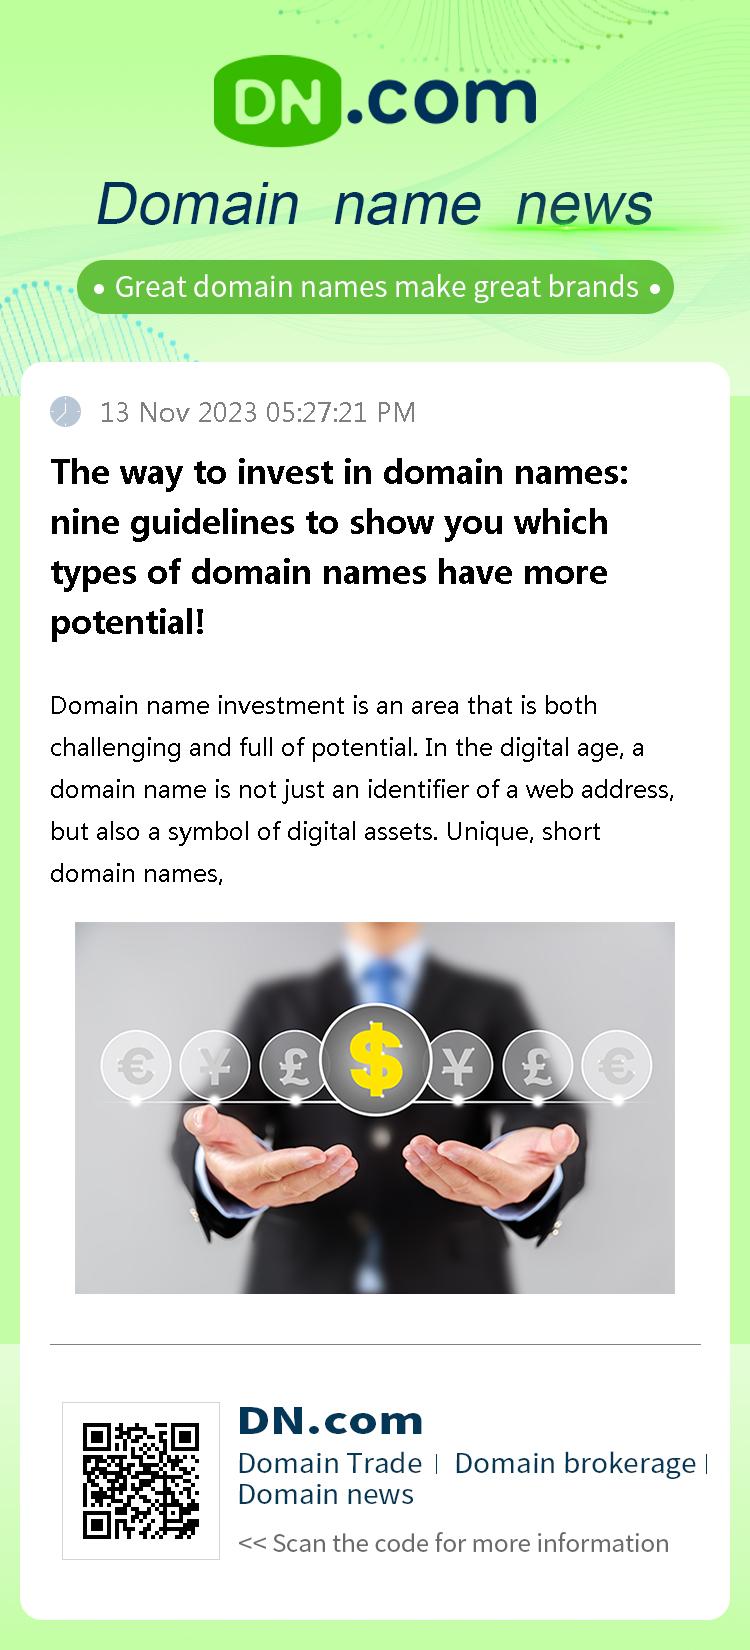 The way to invest in domain names: nine guidelines to show you which types of domain names have more potential!